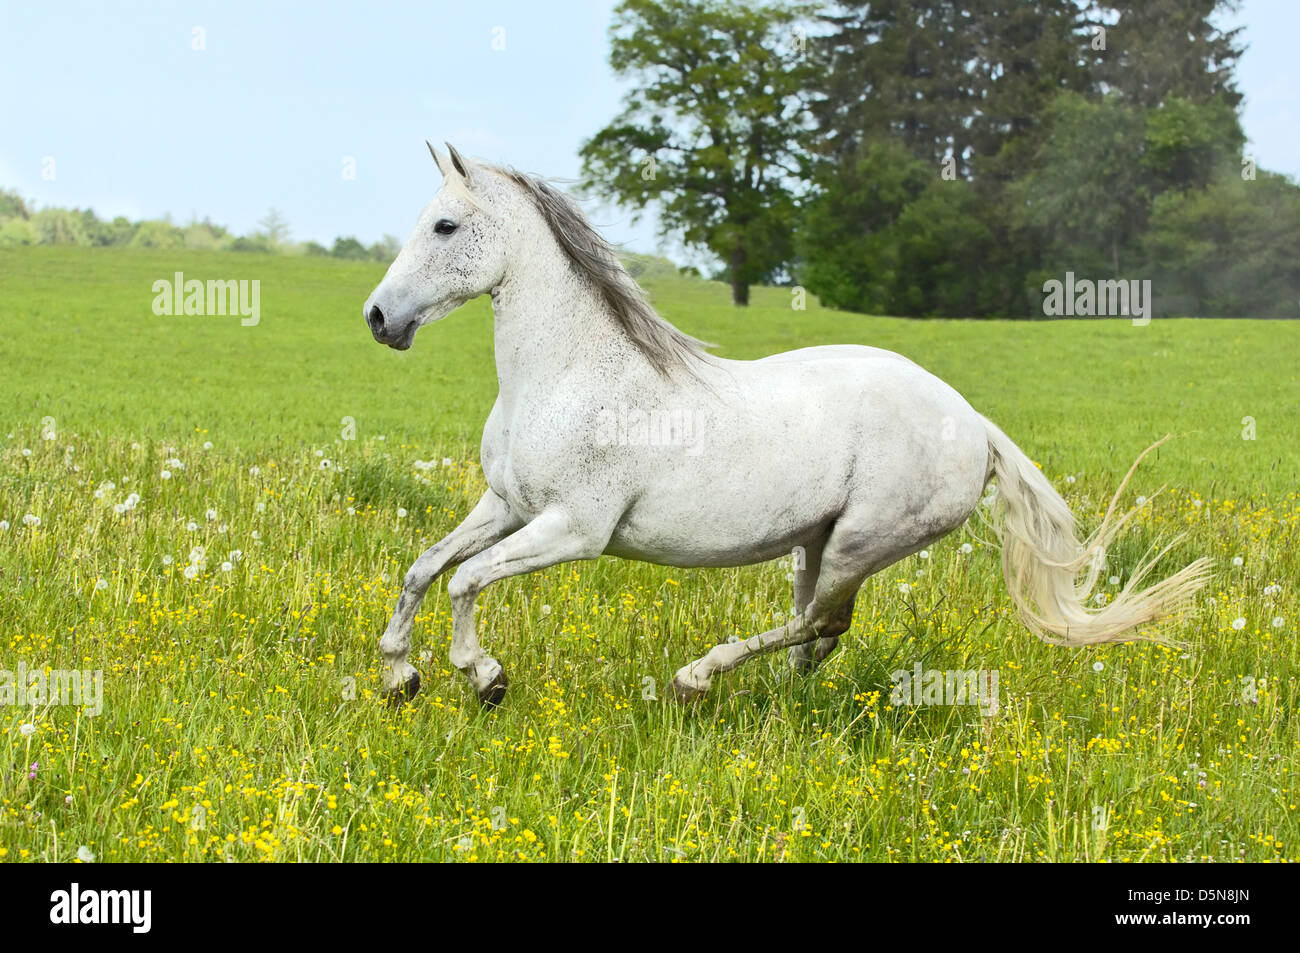 Andalusian horse galloping in a meadow Stock Photo